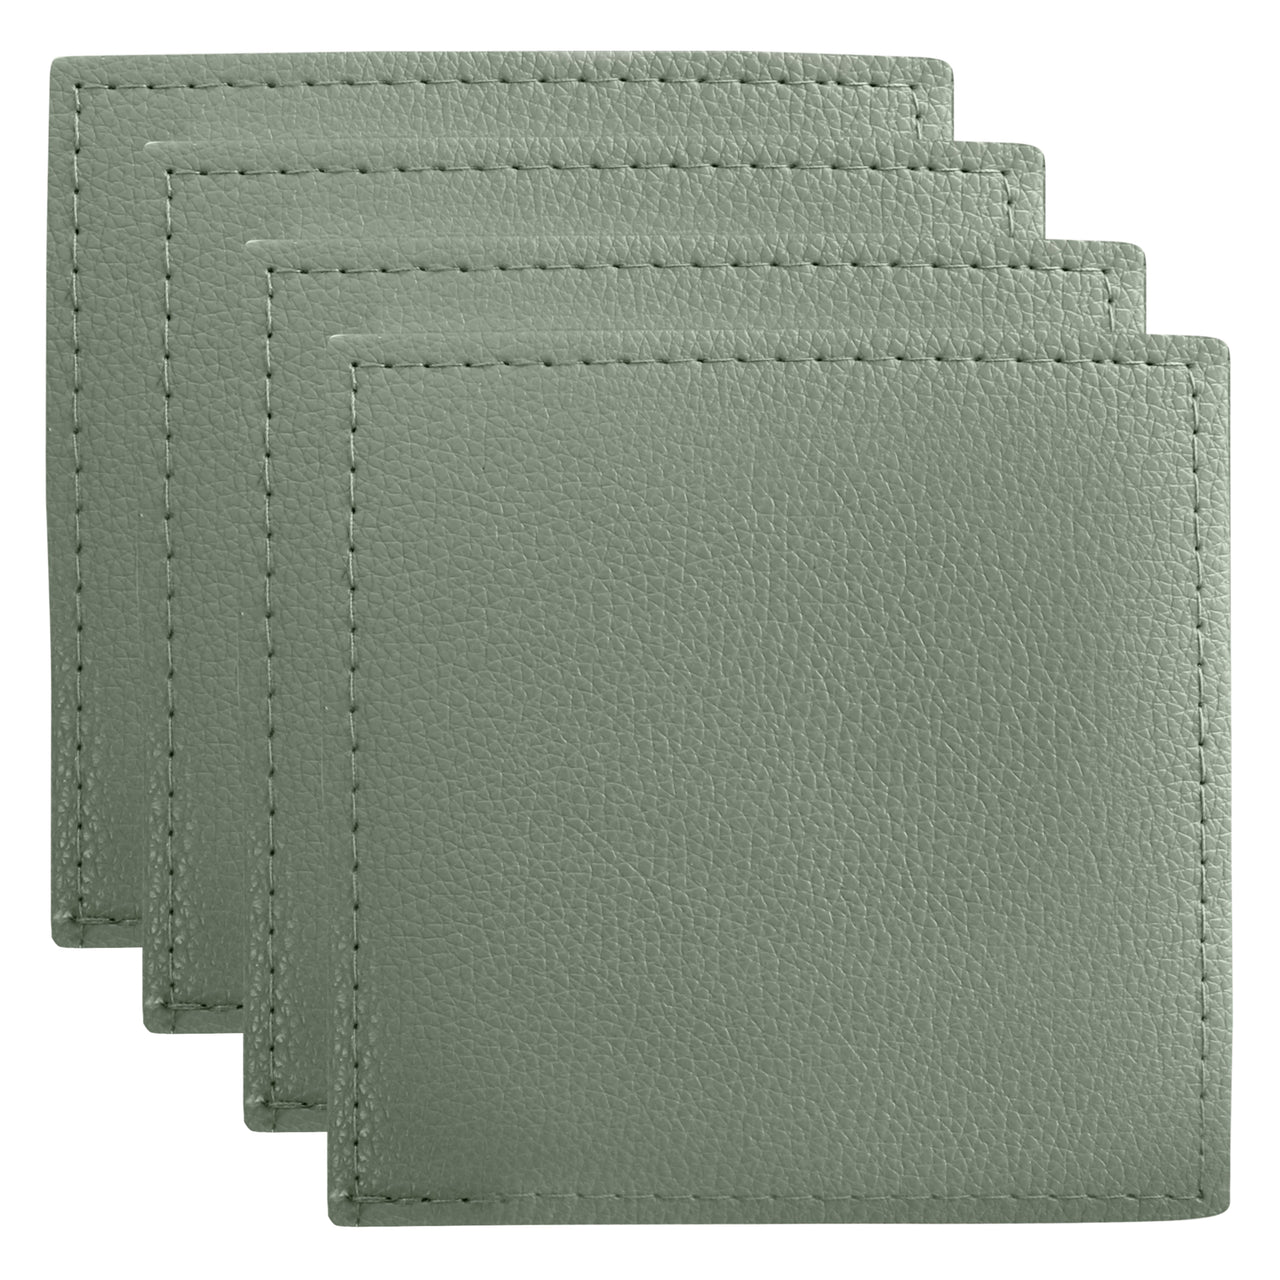 Sage Table Accents Faux Cowhide Leather Coasters (Set of 4)